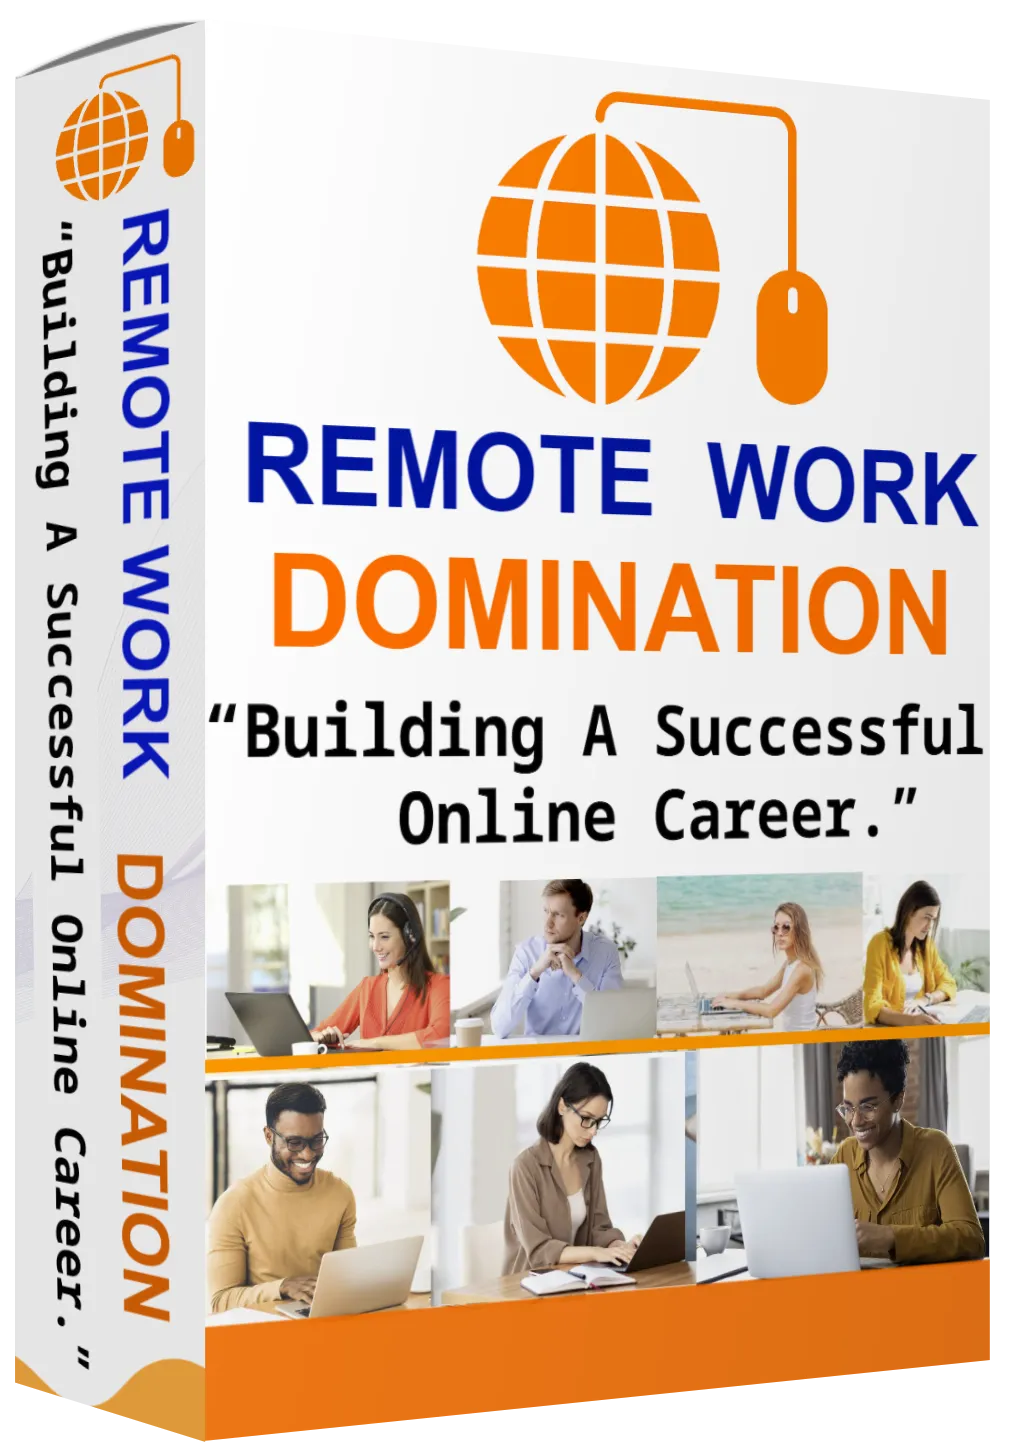 Remote Work Domination: Building a Successful Online Career